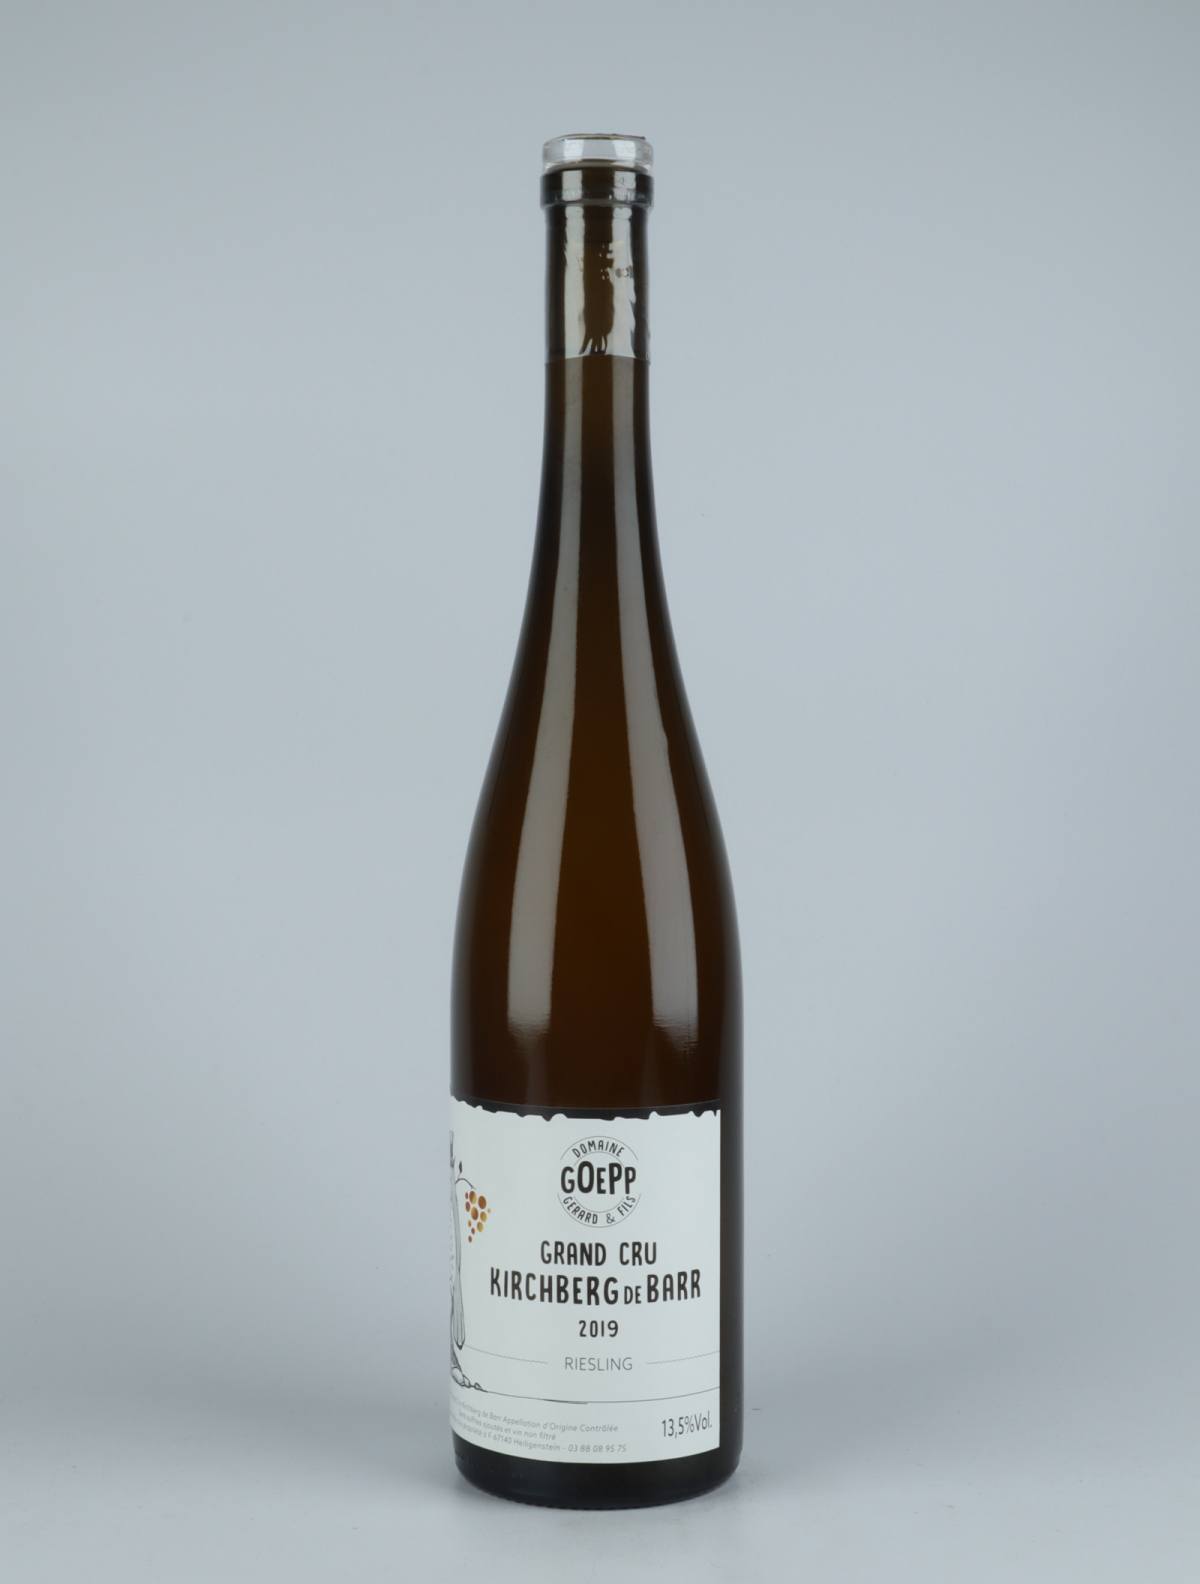 A bottle 2019 Riesling - Grand Cru Kirchberg White wine from Domaine Goepp, Alsace in France